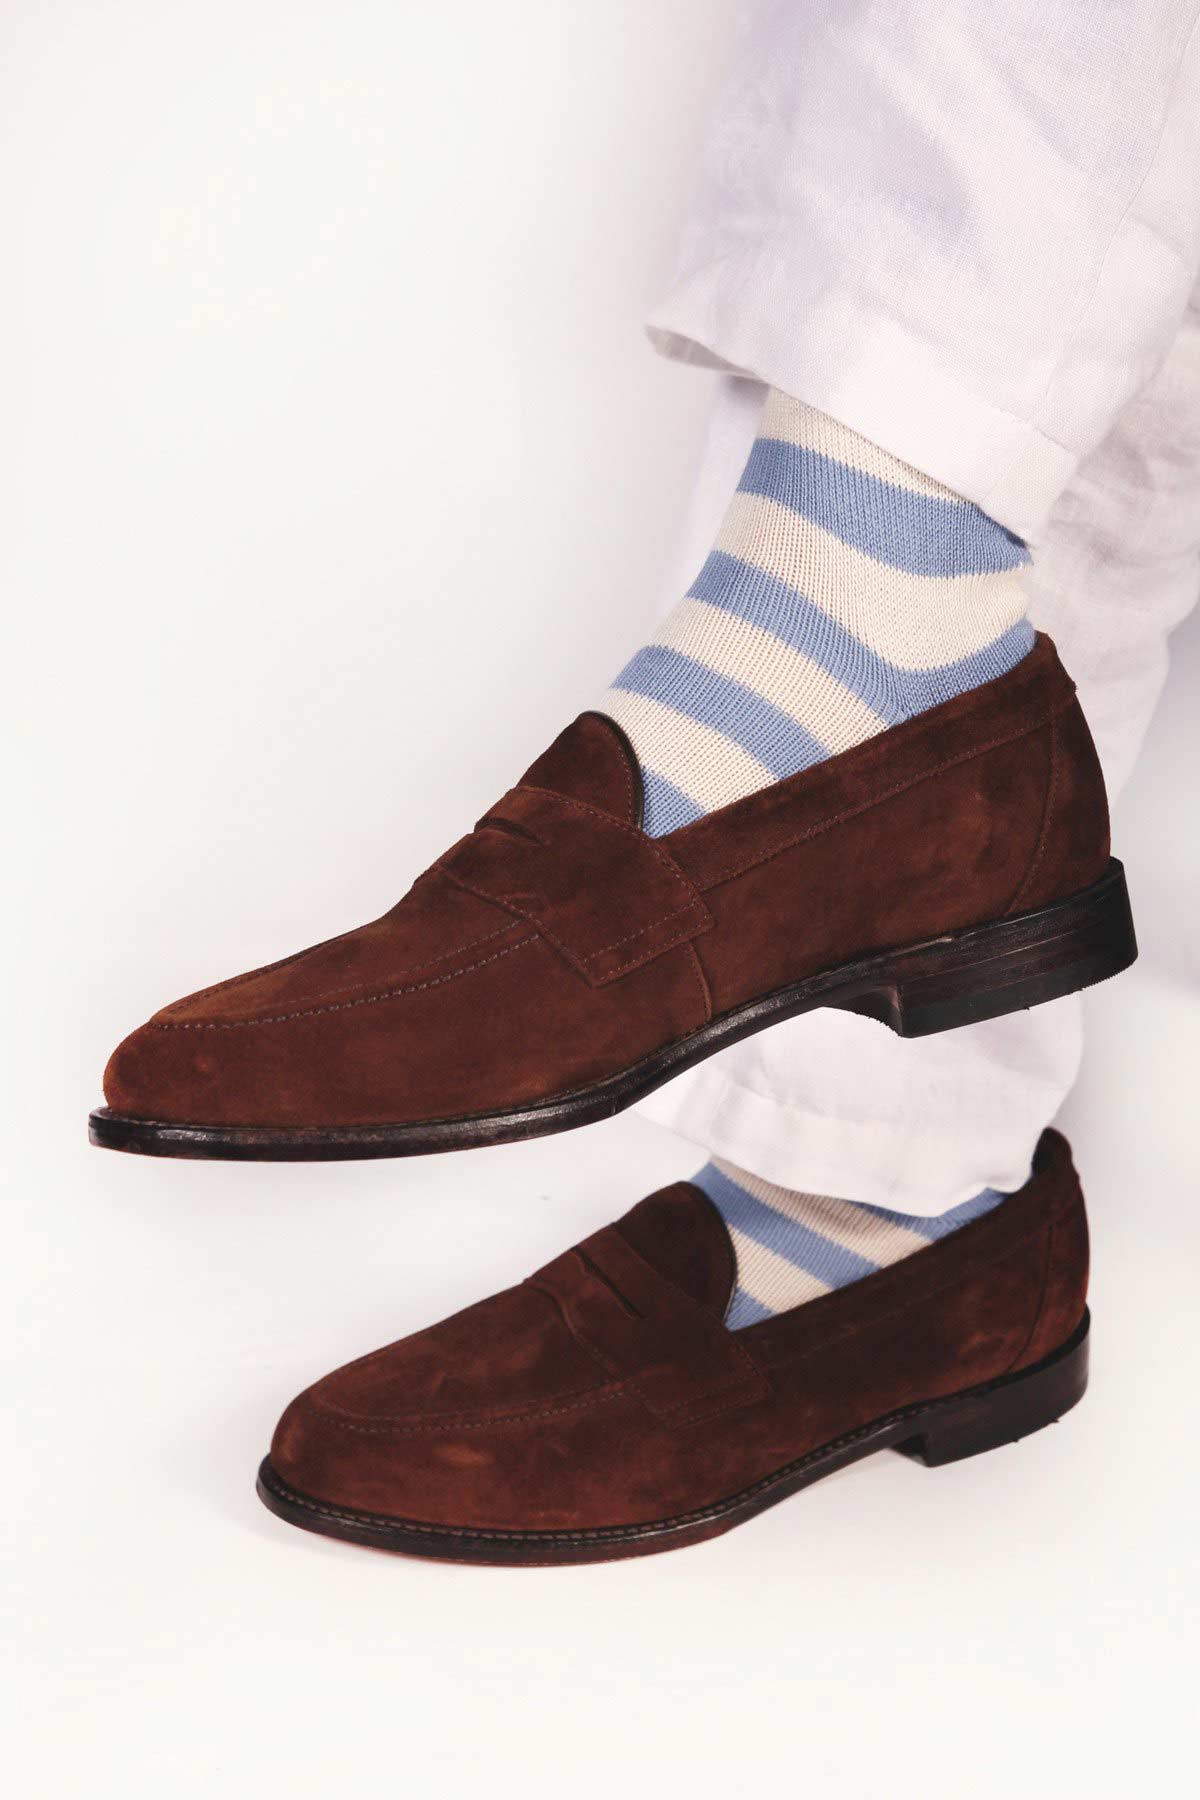 Wishon Thin White and Blue Striped Socks - With Suede Loafers and White Trousers